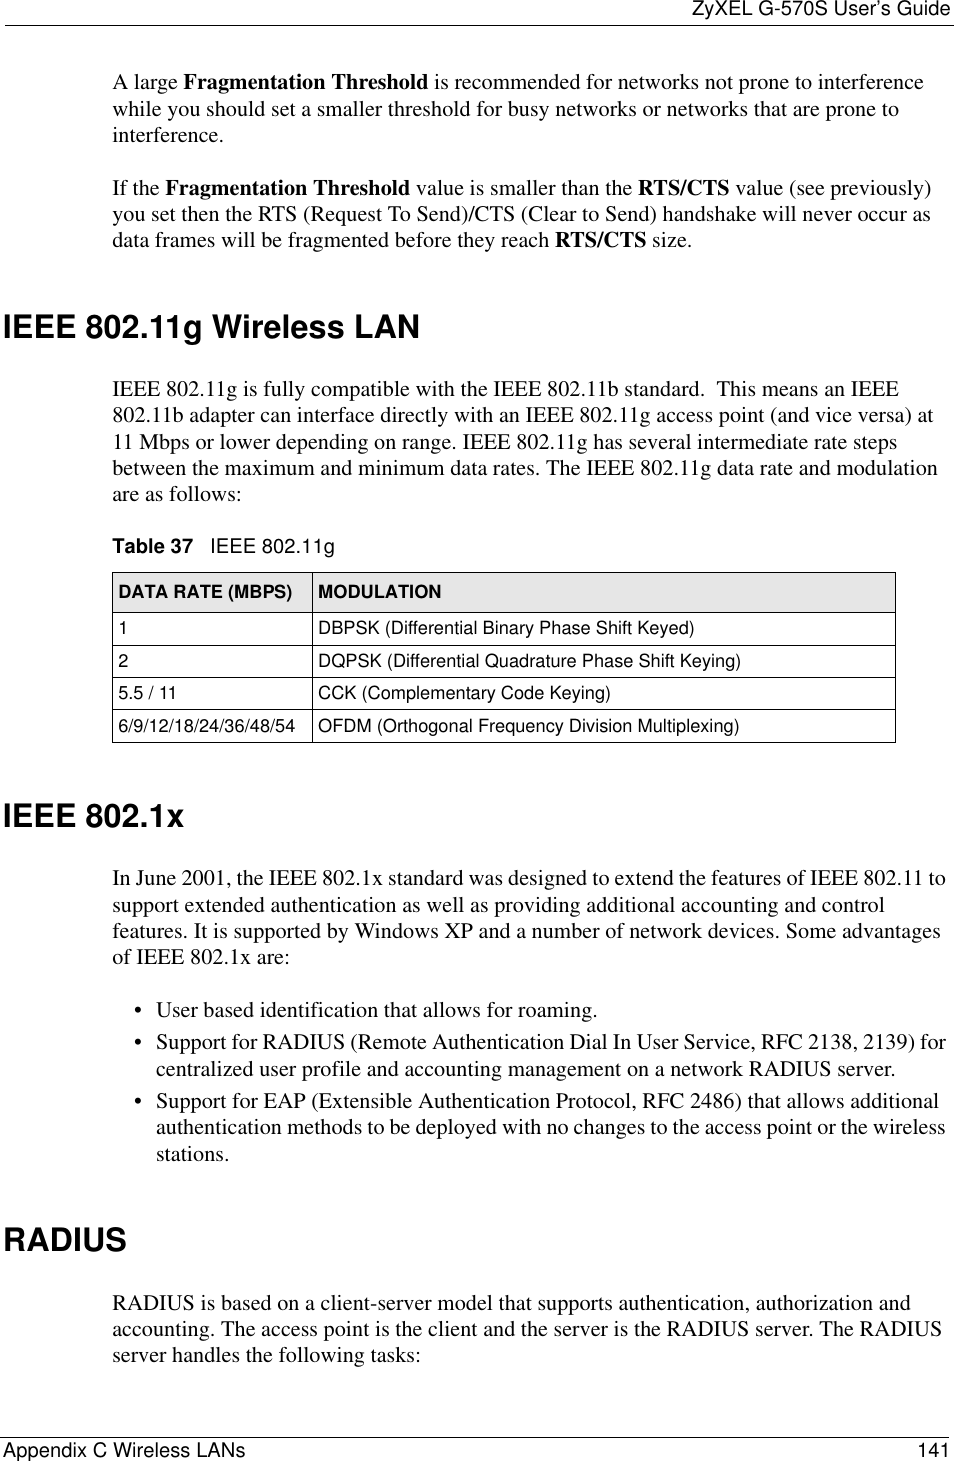 ZyXEL G-570S User’s GuideAppendix C Wireless LANs 141A large Fragmentation Threshold is recommended for networks not prone to interference while you should set a smaller threshold for busy networks or networks that are prone to interference.If the Fragmentation Threshold value is smaller than the RTS/CTS value (see previously) you set then the RTS (Request To Send)/CTS (Clear to Send) handshake will never occur as data frames will be fragmented before they reach RTS/CTS size.IEEE 802.11g Wireless LANIEEE 802.11g is fully compatible with the IEEE 802.11b standard.  This means an IEEE 802.11b adapter can interface directly with an IEEE 802.11g access point (and vice versa) at 11 Mbps or lower depending on range. IEEE 802.11g has several intermediate rate steps between the maximum and minimum data rates. The IEEE 802.11g data rate and modulation are as follows:IEEE 802.1xIn June 2001, the IEEE 802.1x standard was designed to extend the features of IEEE 802.11 to support extended authentication as well as providing additional accounting and control features. It is supported by Windows XP and a number of network devices. Some advantages of IEEE 802.1x are:• User based identification that allows for roaming.• Support for RADIUS (Remote Authentication Dial In User Service, RFC 2138, 2139) for centralized user profile and accounting management on a network RADIUS server. • Support for EAP (Extensible Authentication Protocol, RFC 2486) that allows additional authentication methods to be deployed with no changes to the access point or the wireless stations.RADIUSRADIUS is based on a client-server model that supports authentication, authorization and accounting. The access point is the client and the server is the RADIUS server. The RADIUS server handles the following tasks:Table 37   IEEE 802.11gDATA RATE (MBPS) MODULATION1 DBPSK (Differential Binary Phase Shift Keyed)2 DQPSK (Differential Quadrature Phase Shift Keying)5.5 / 11 CCK (Complementary Code Keying) 6/9/12/18/24/36/48/54 OFDM (Orthogonal Frequency Division Multiplexing) 